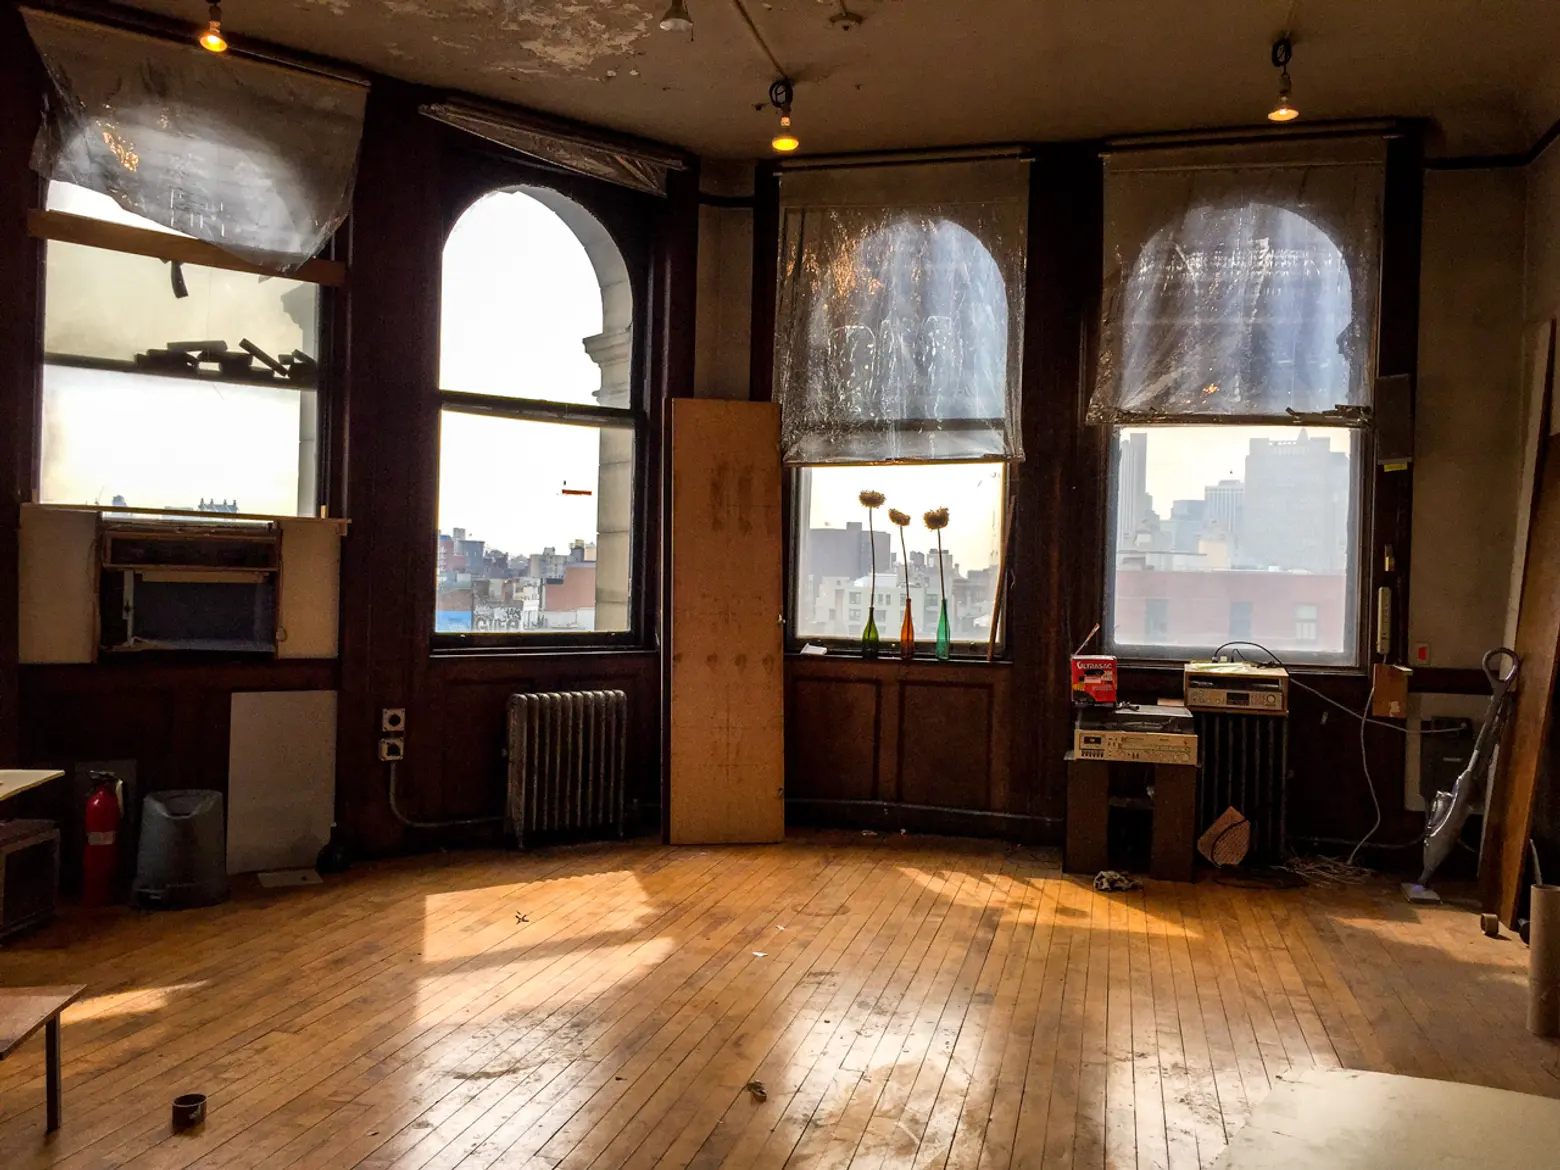 Adventures in Trespassing at 190 Bowery; Average Down Payment for a NYC Home Is $350K